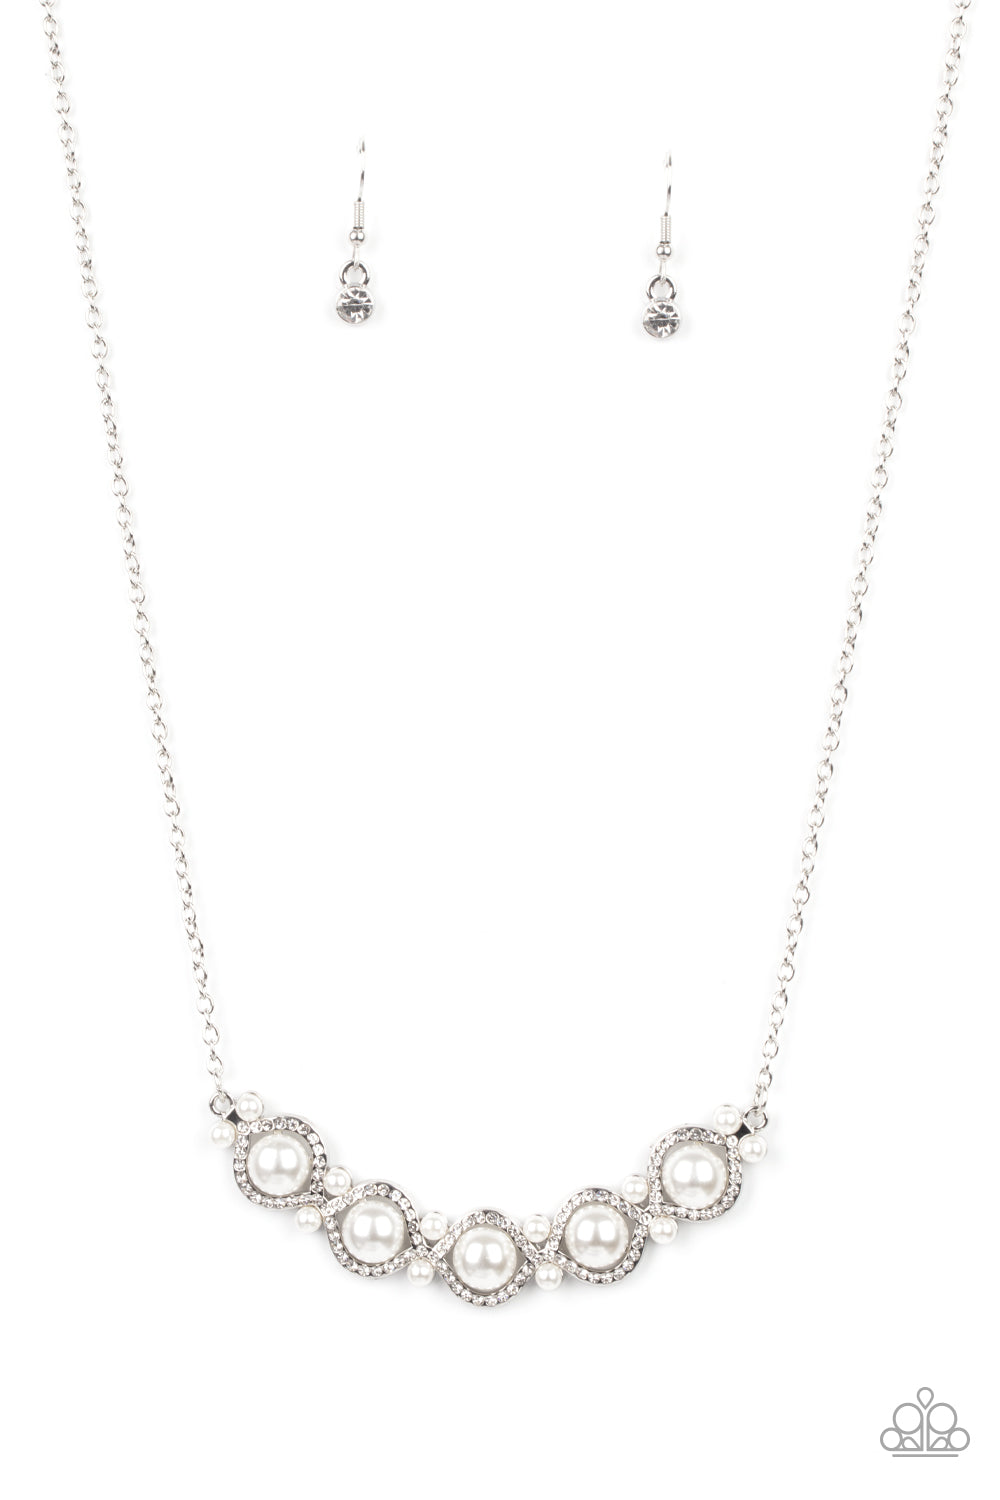 Life of The Wedding Party - White - Paparazzi Necklace